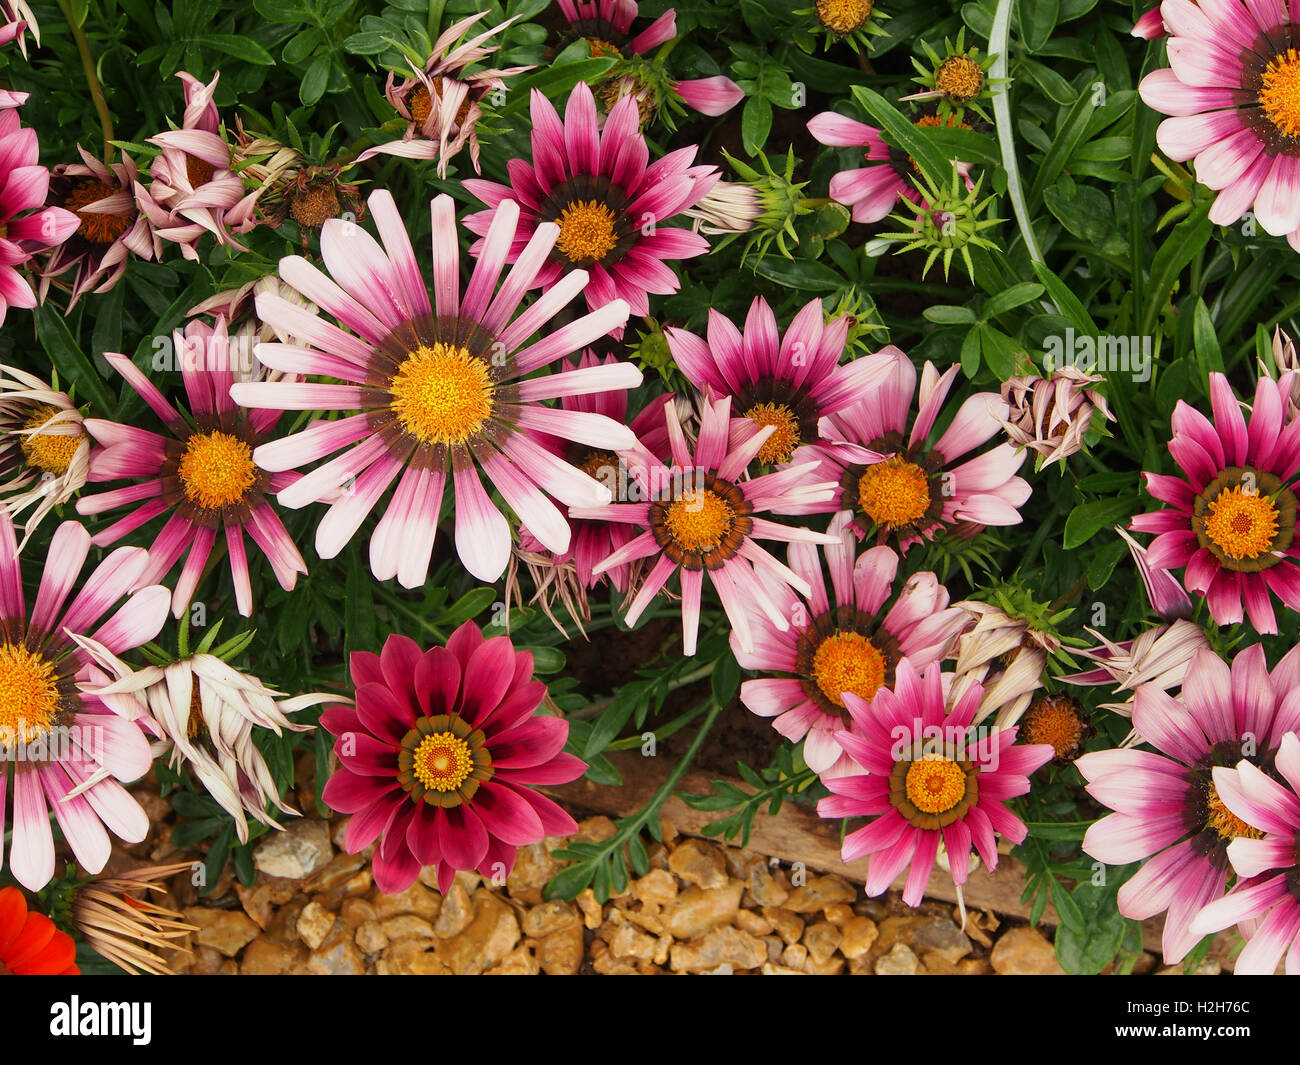 Orange gazanias (a drought tolerant plant native to South Africa) in full bloom. Stock Photo